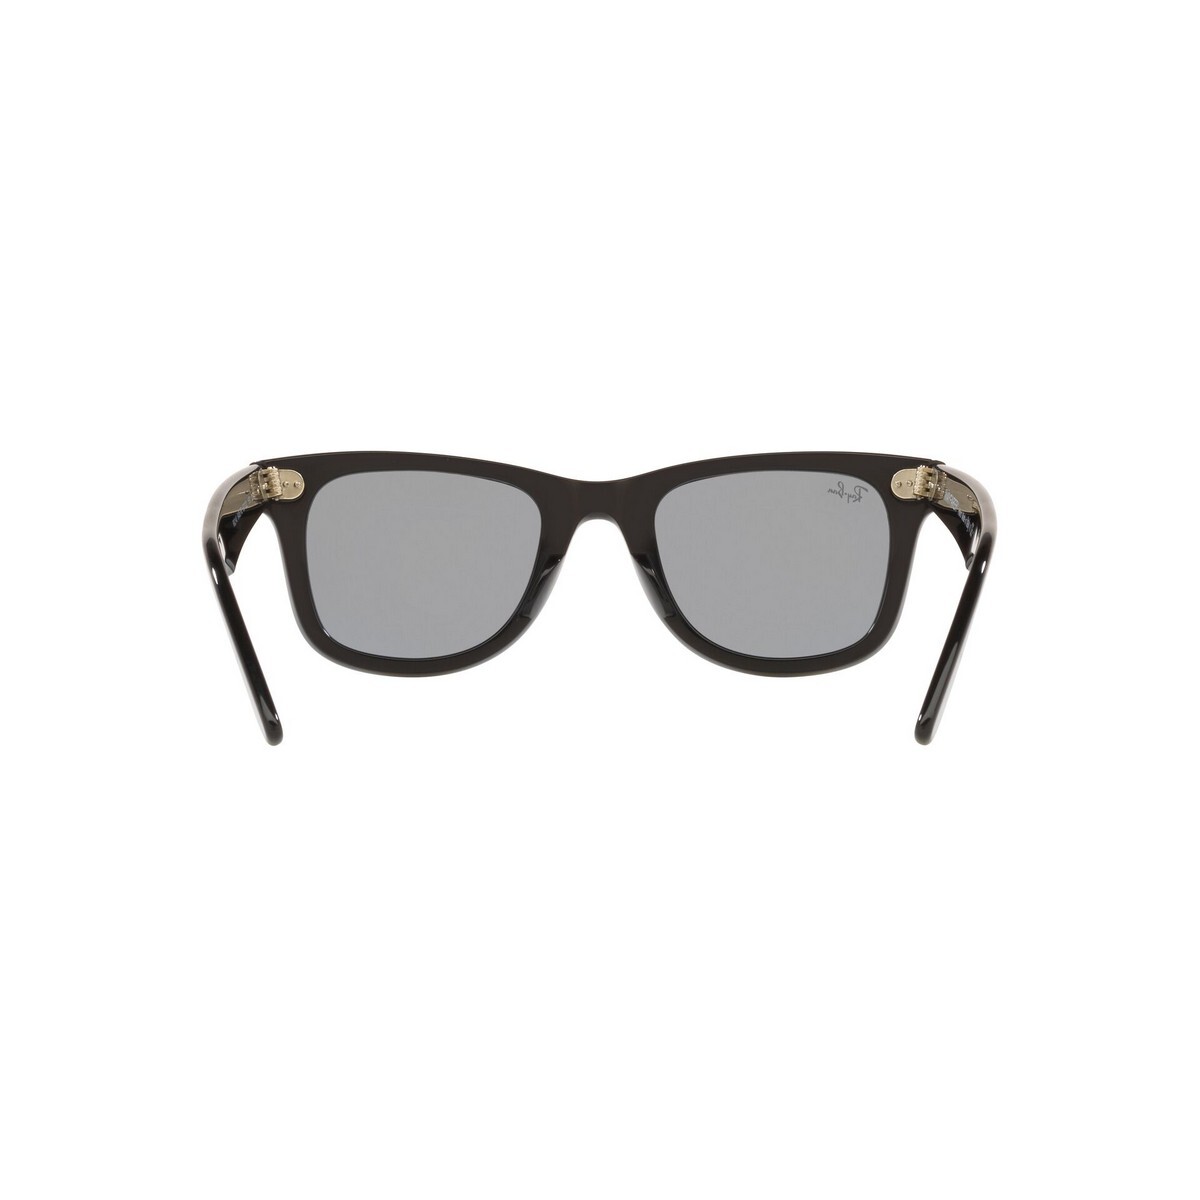 Ray-Ban Unisex Frame With  Grey Lens Sunglass